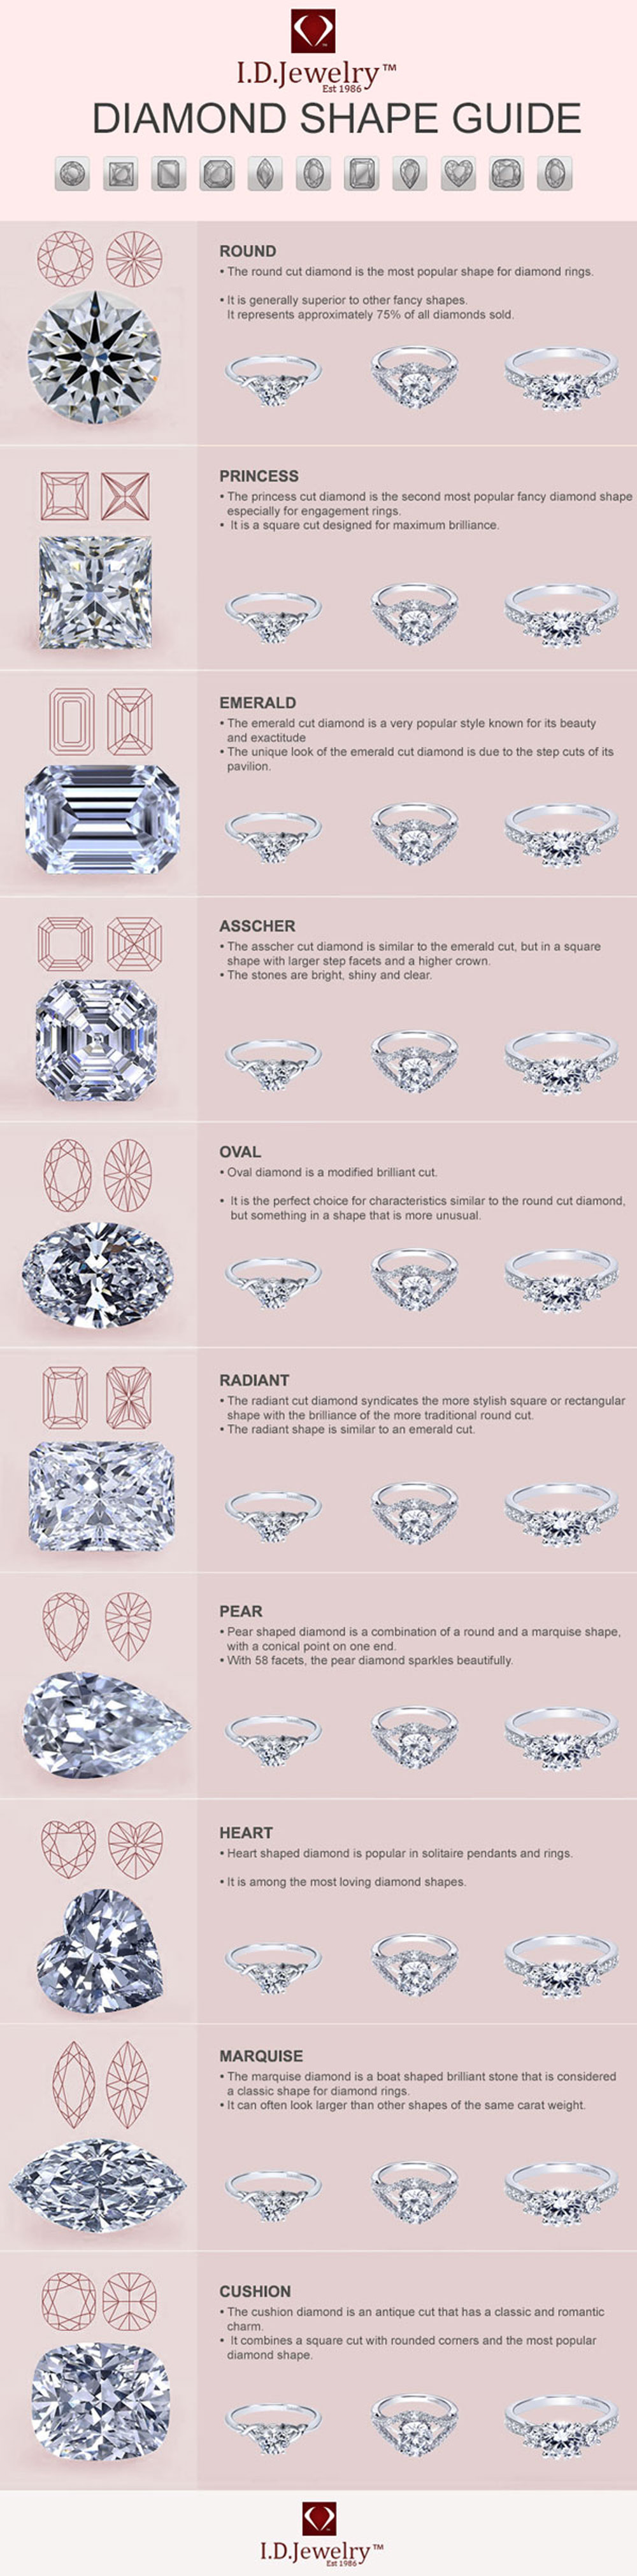 Diamond Shapes Guide for Beginners